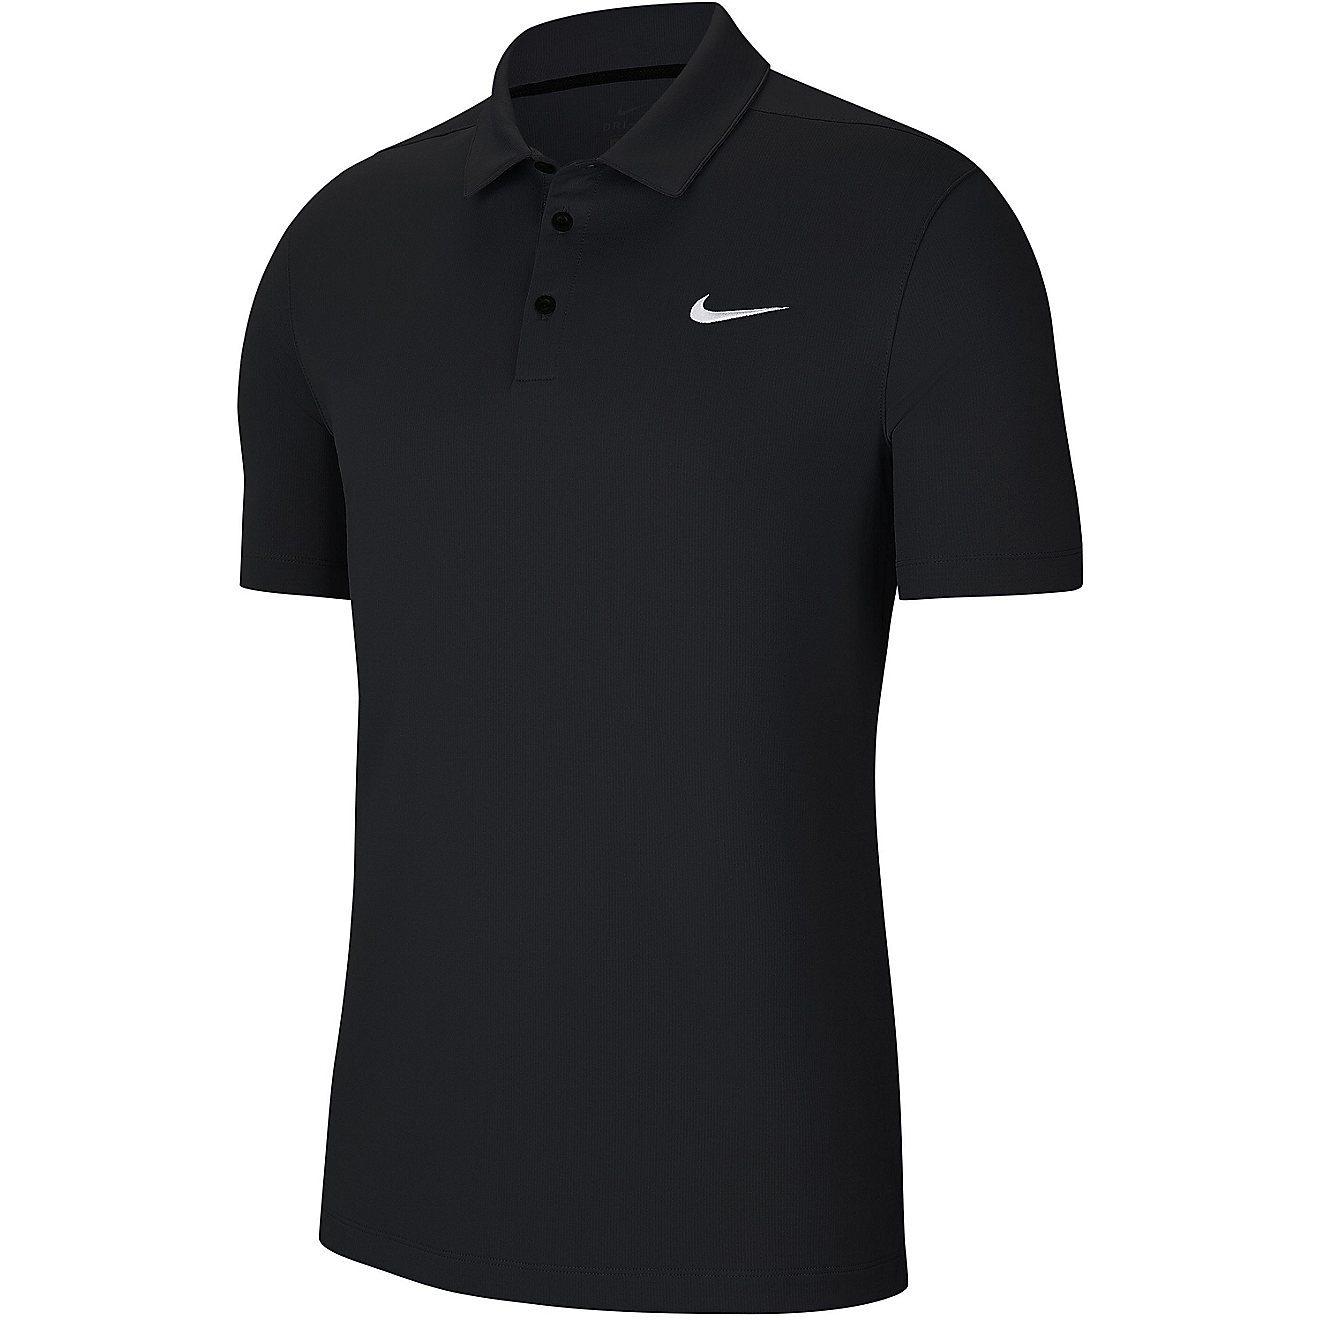 Nike Men's Dri-FIT Football Polo Shirt                                                                                           - view number 6